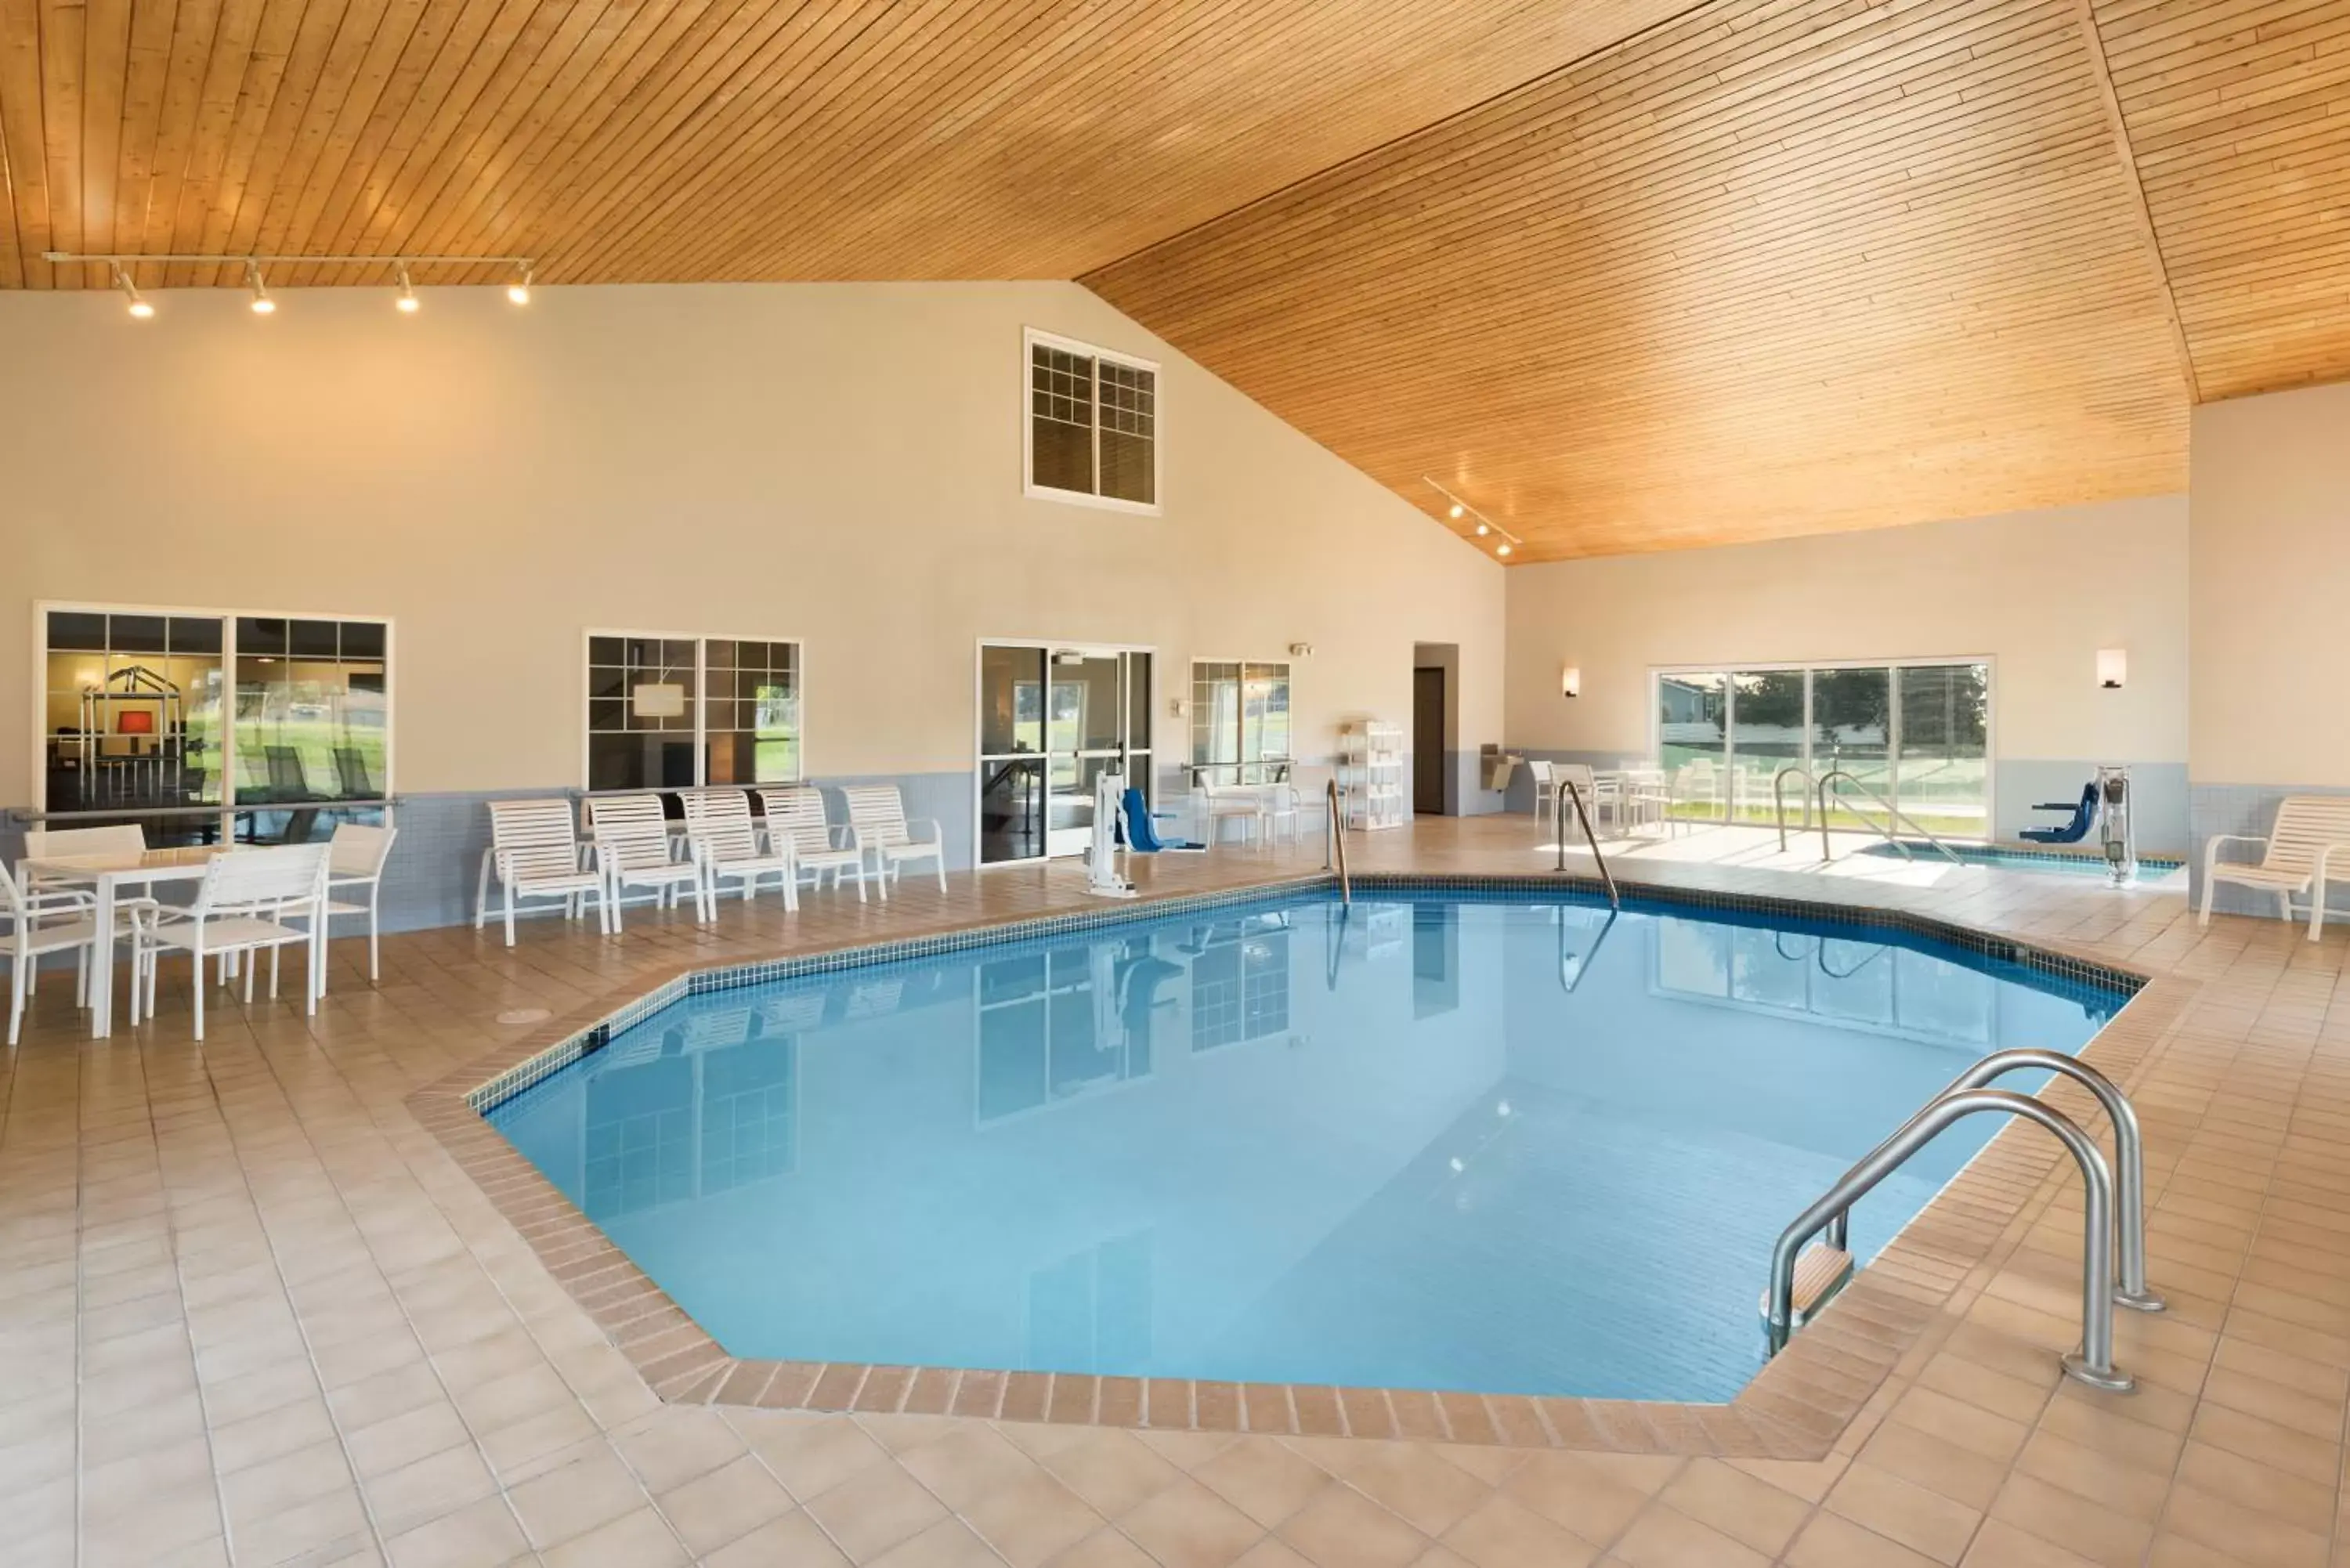 Swimming Pool in Country Inn & Suites by Radisson, Chippewa Falls, WI